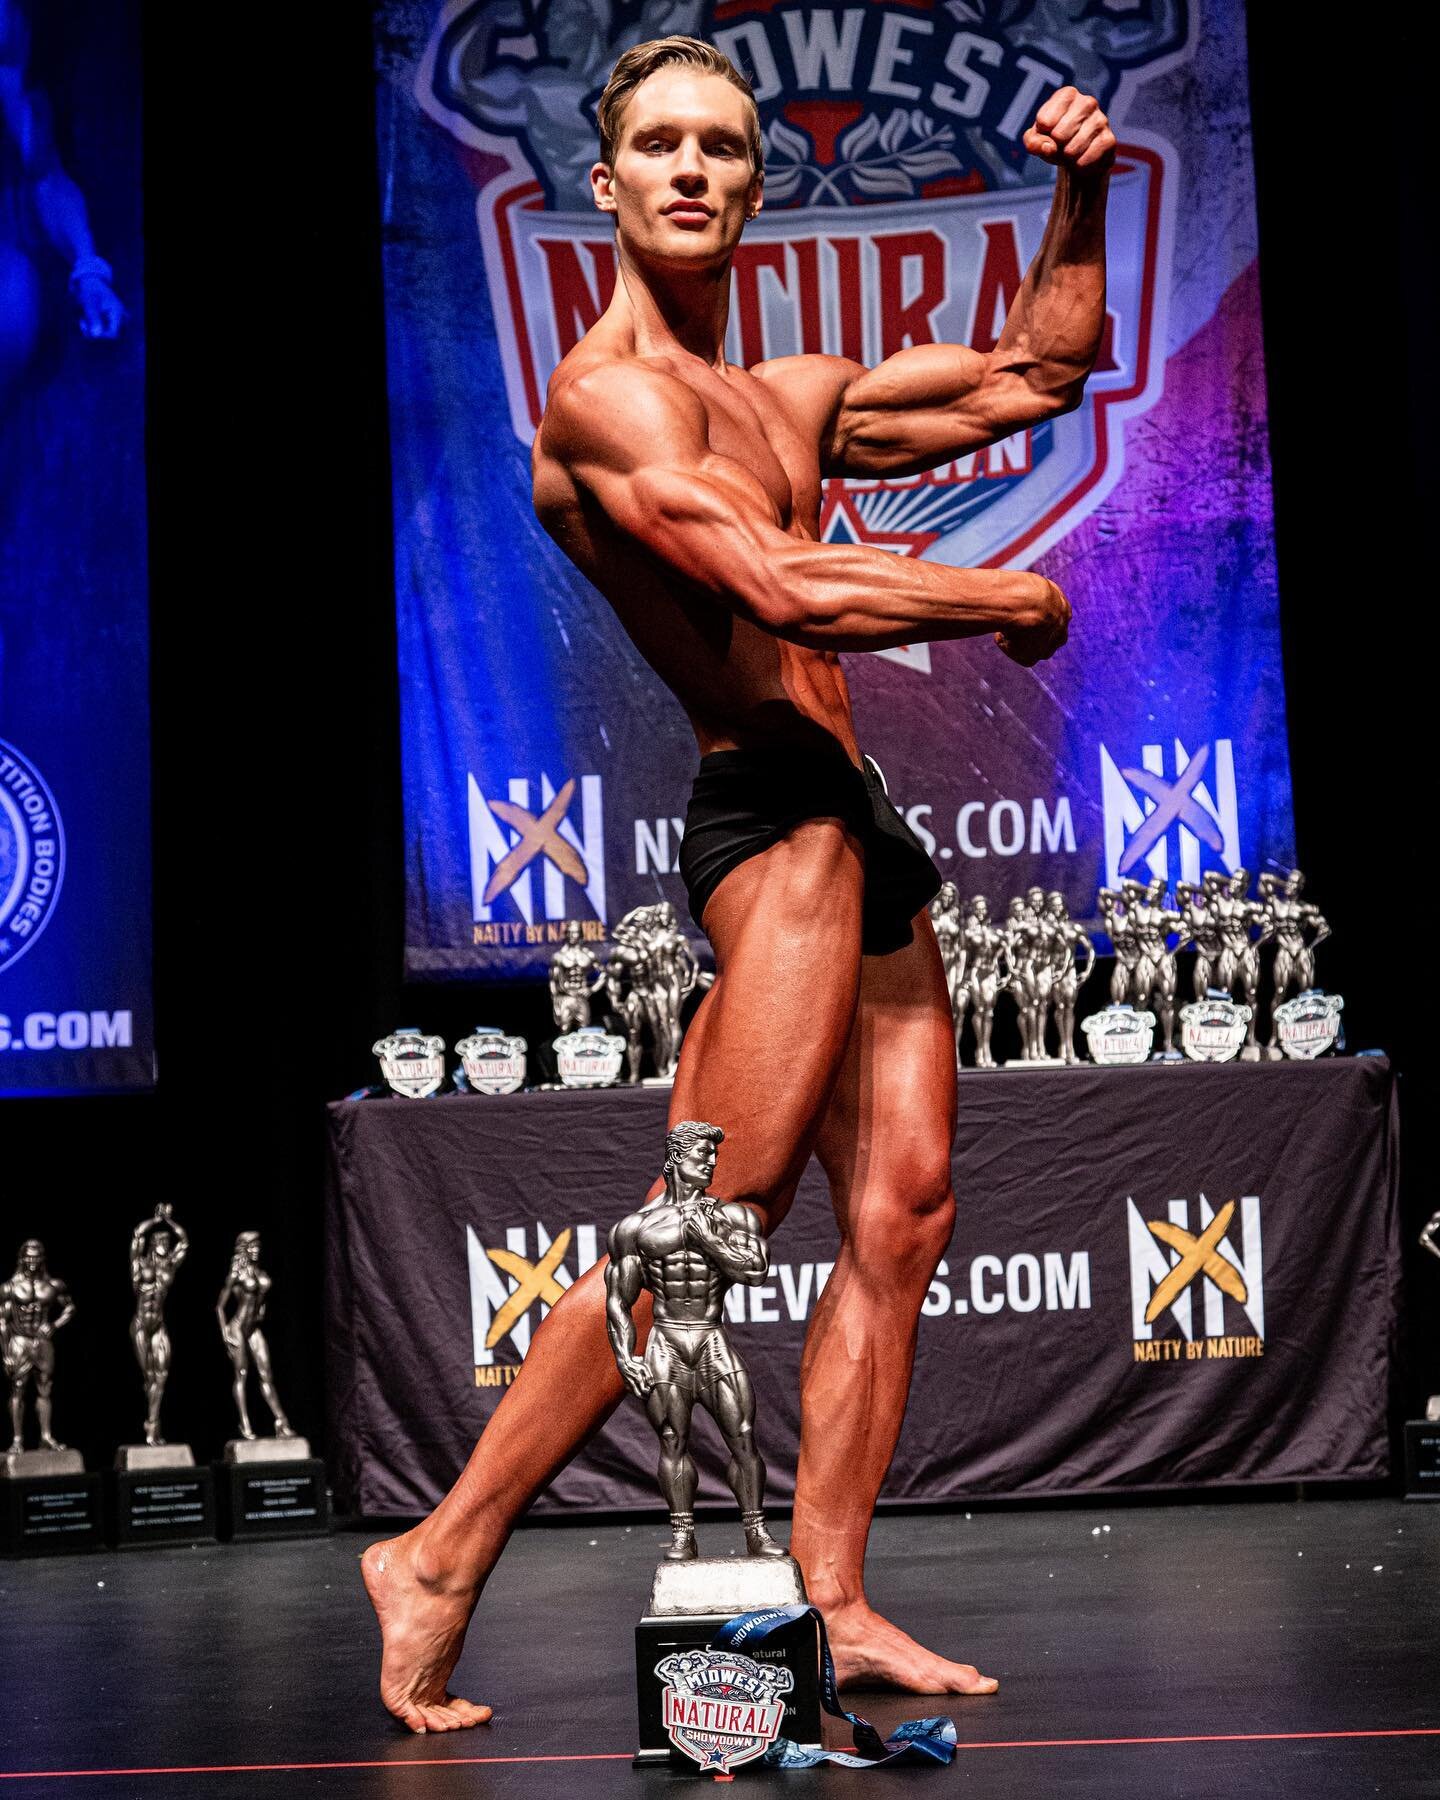 The Natural Cascades Bodybuilding Classic coming to the Kirkland